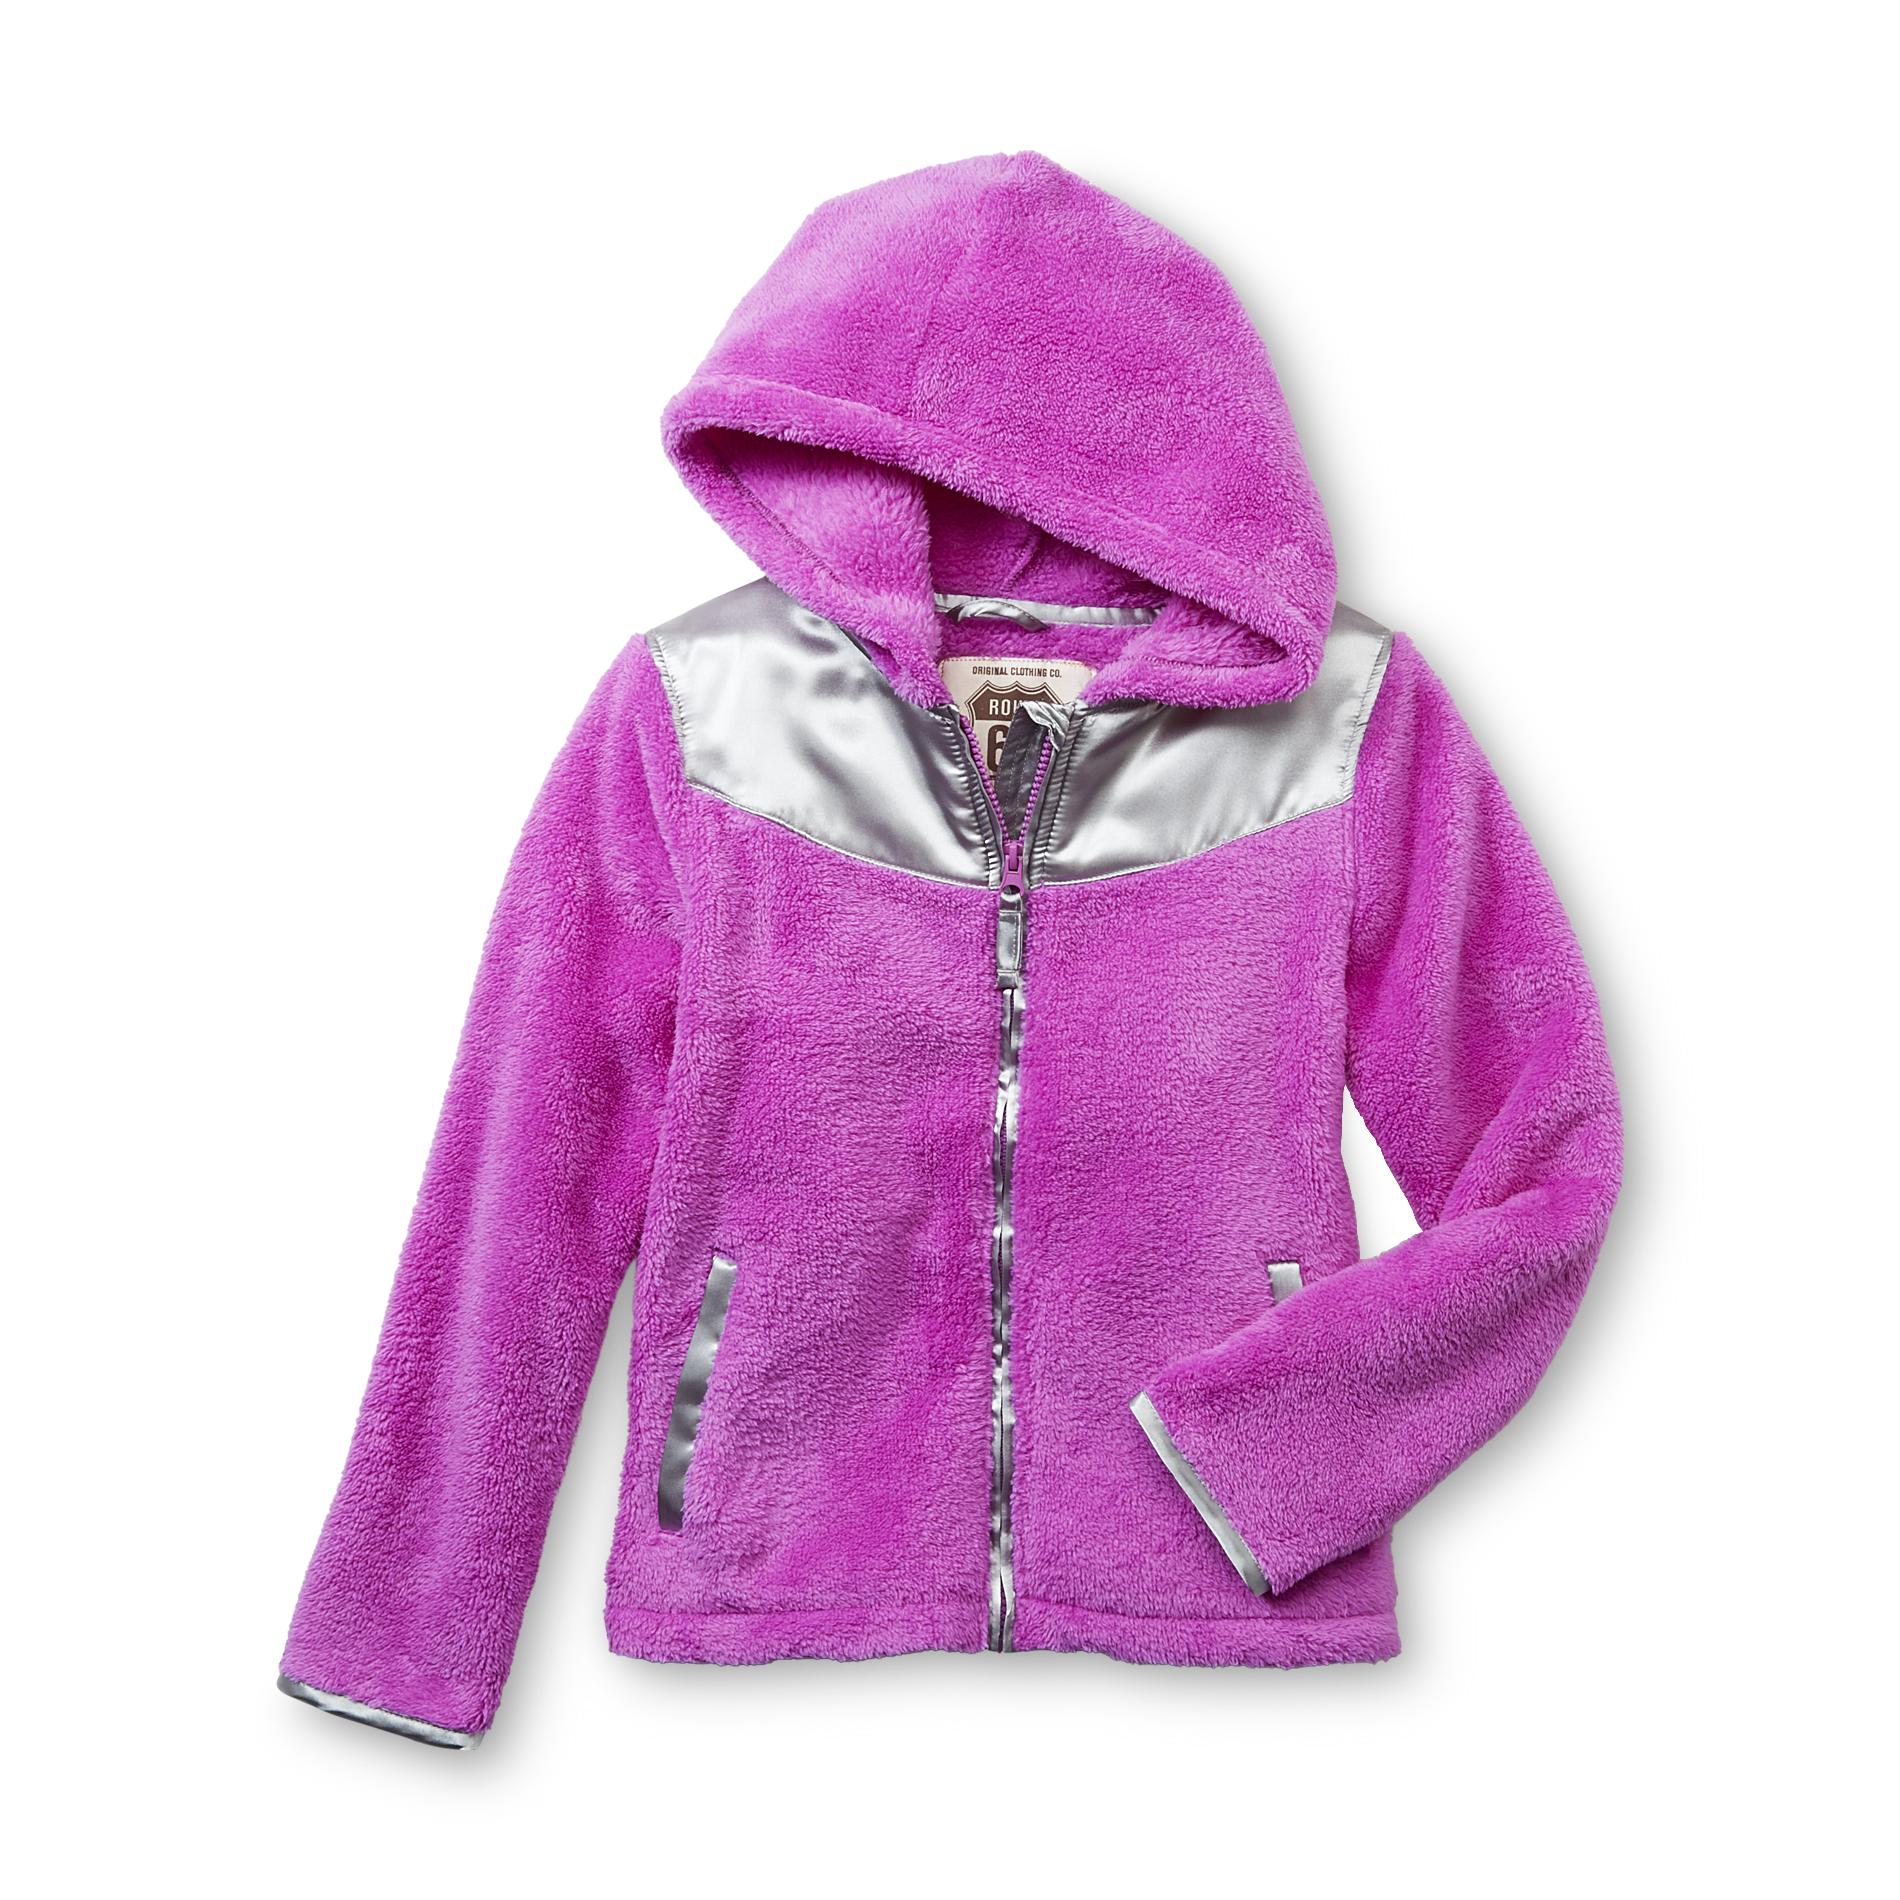 Route 66 Girl's Hooded Jacket